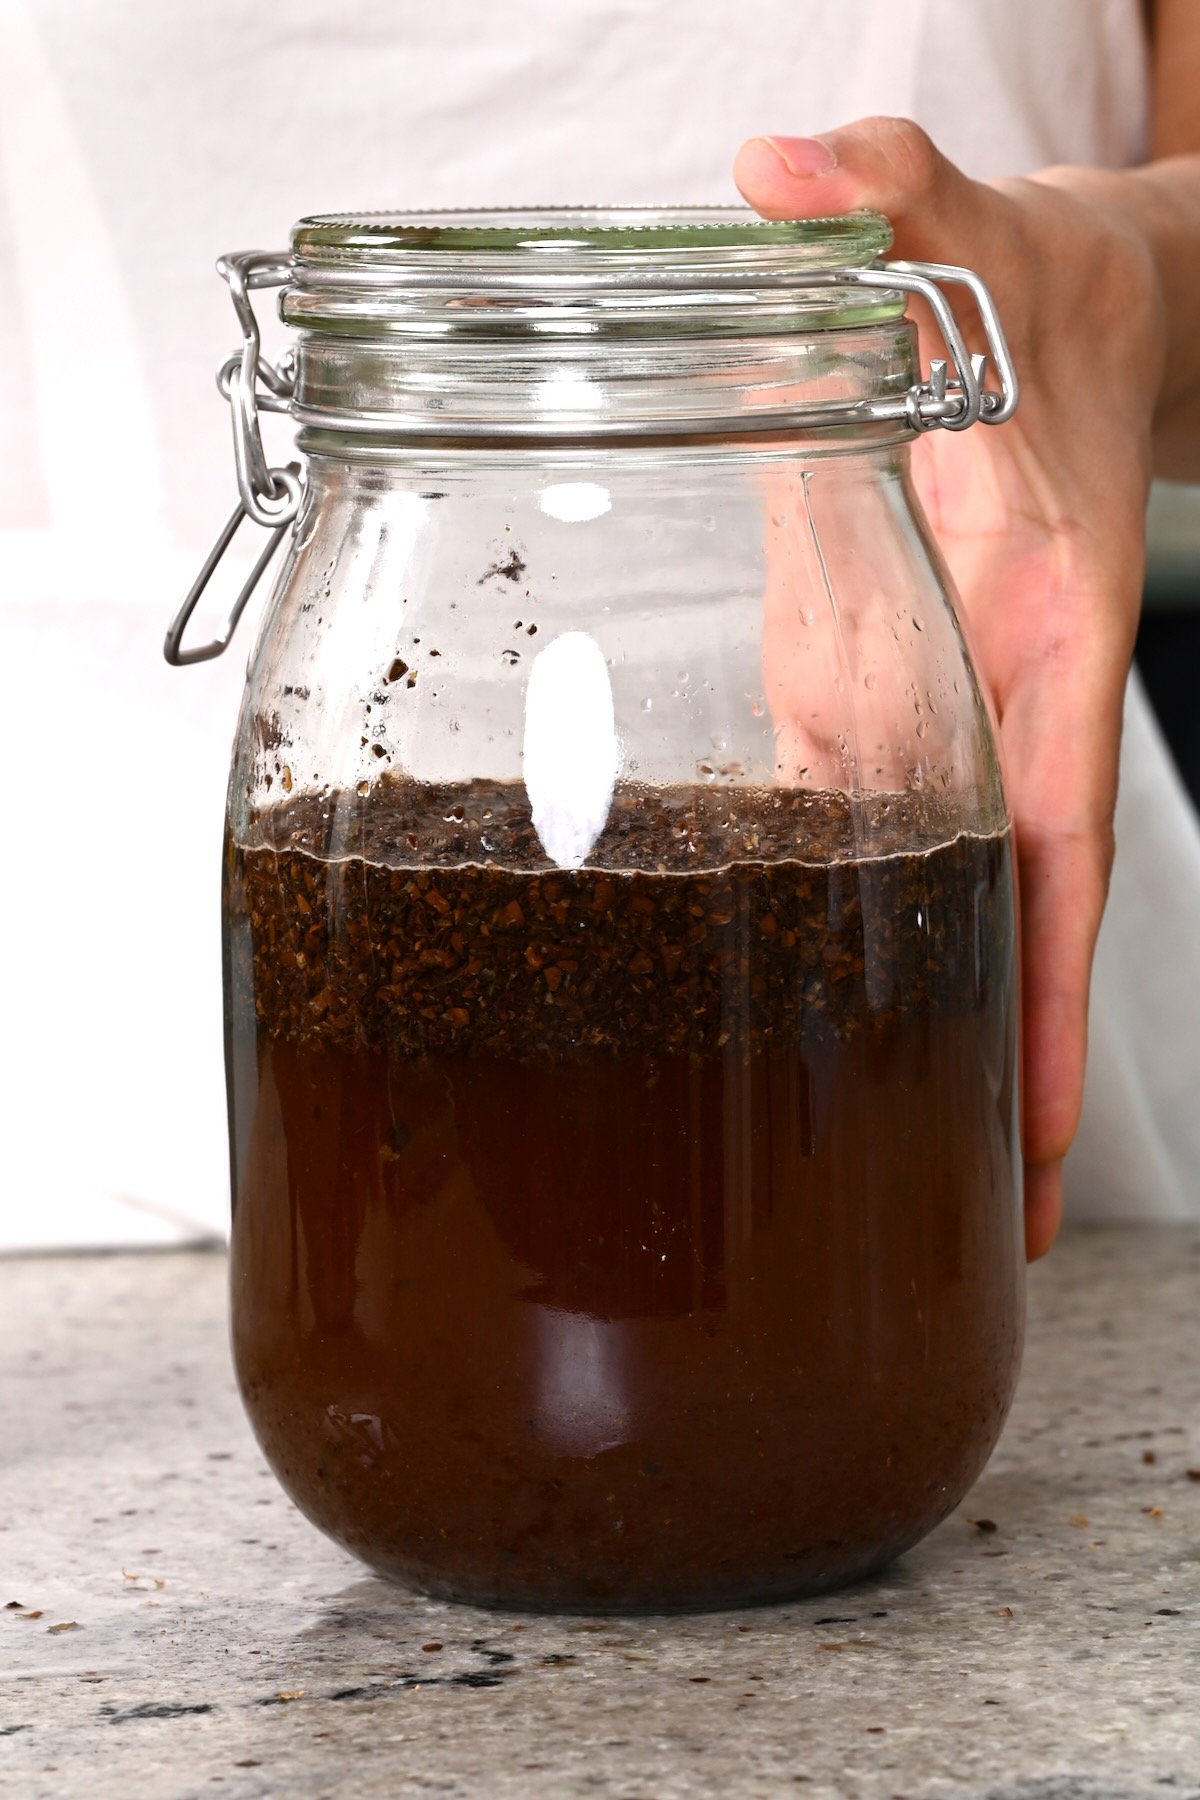 Mixing water and ground coffee in a large jar